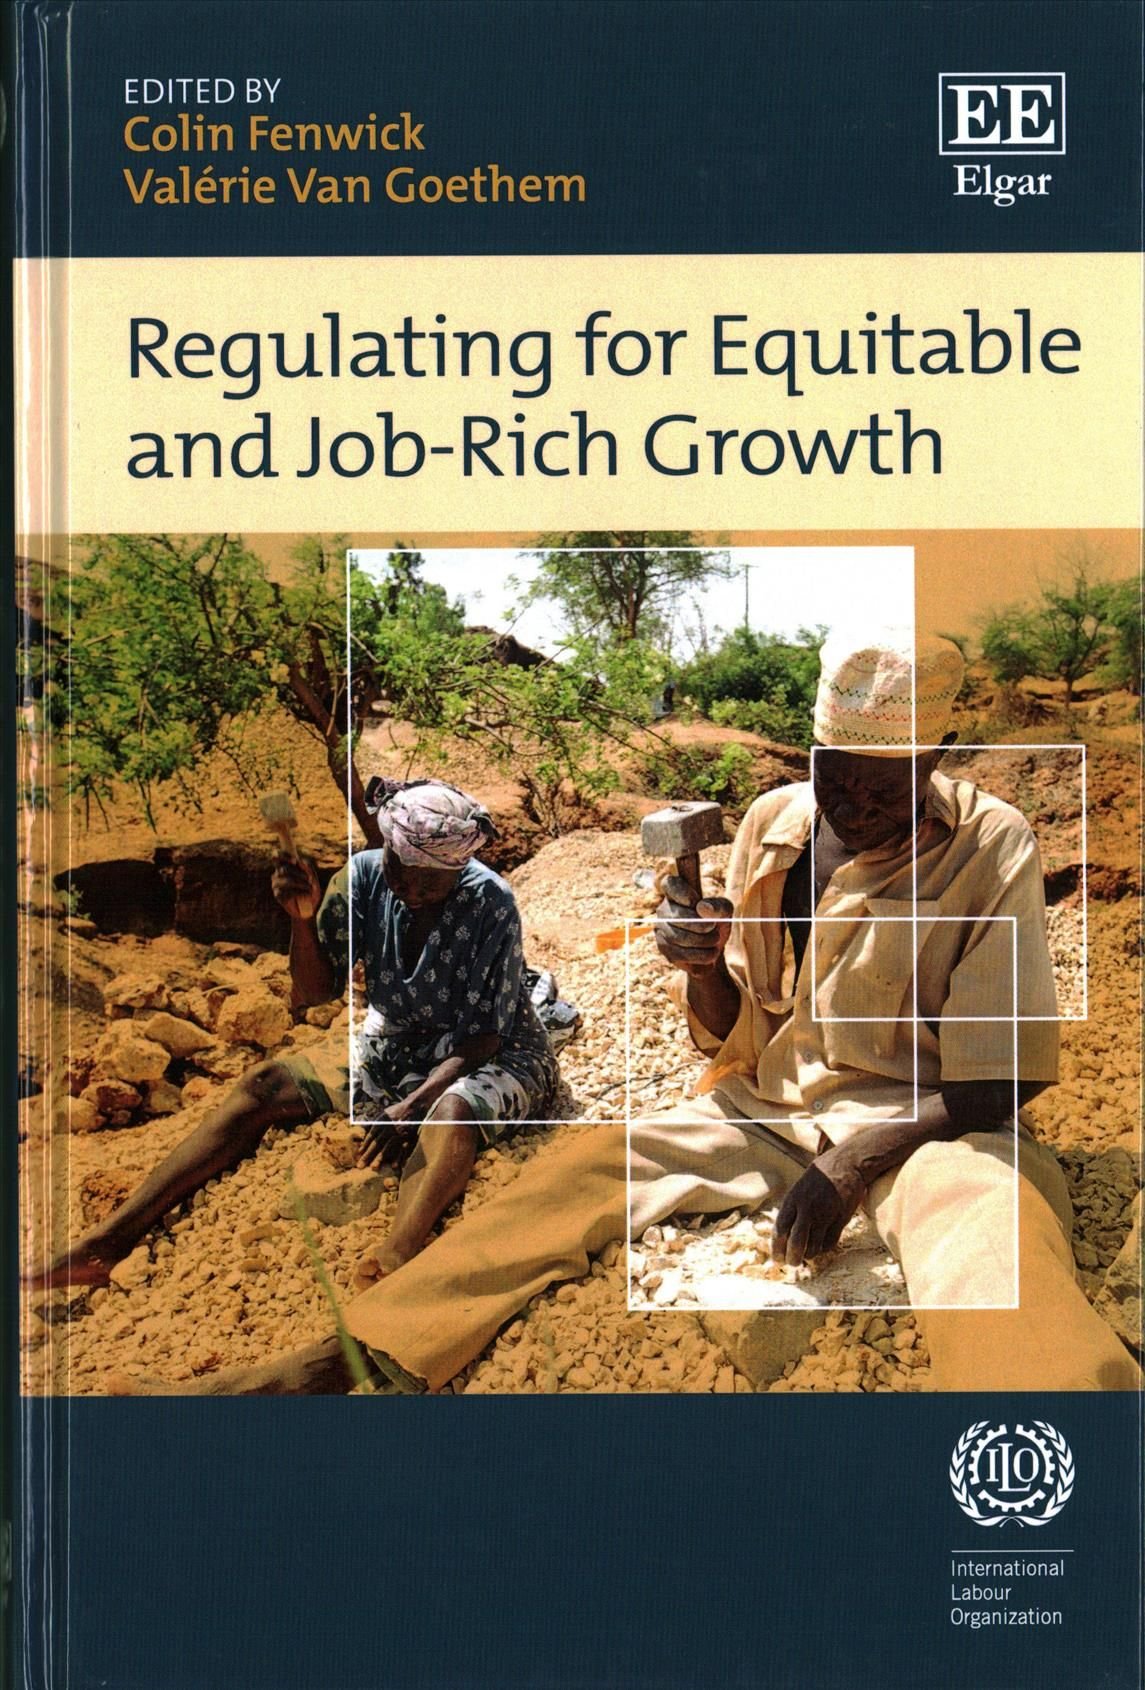 Regulating for Equitable and Job-Rich Growth